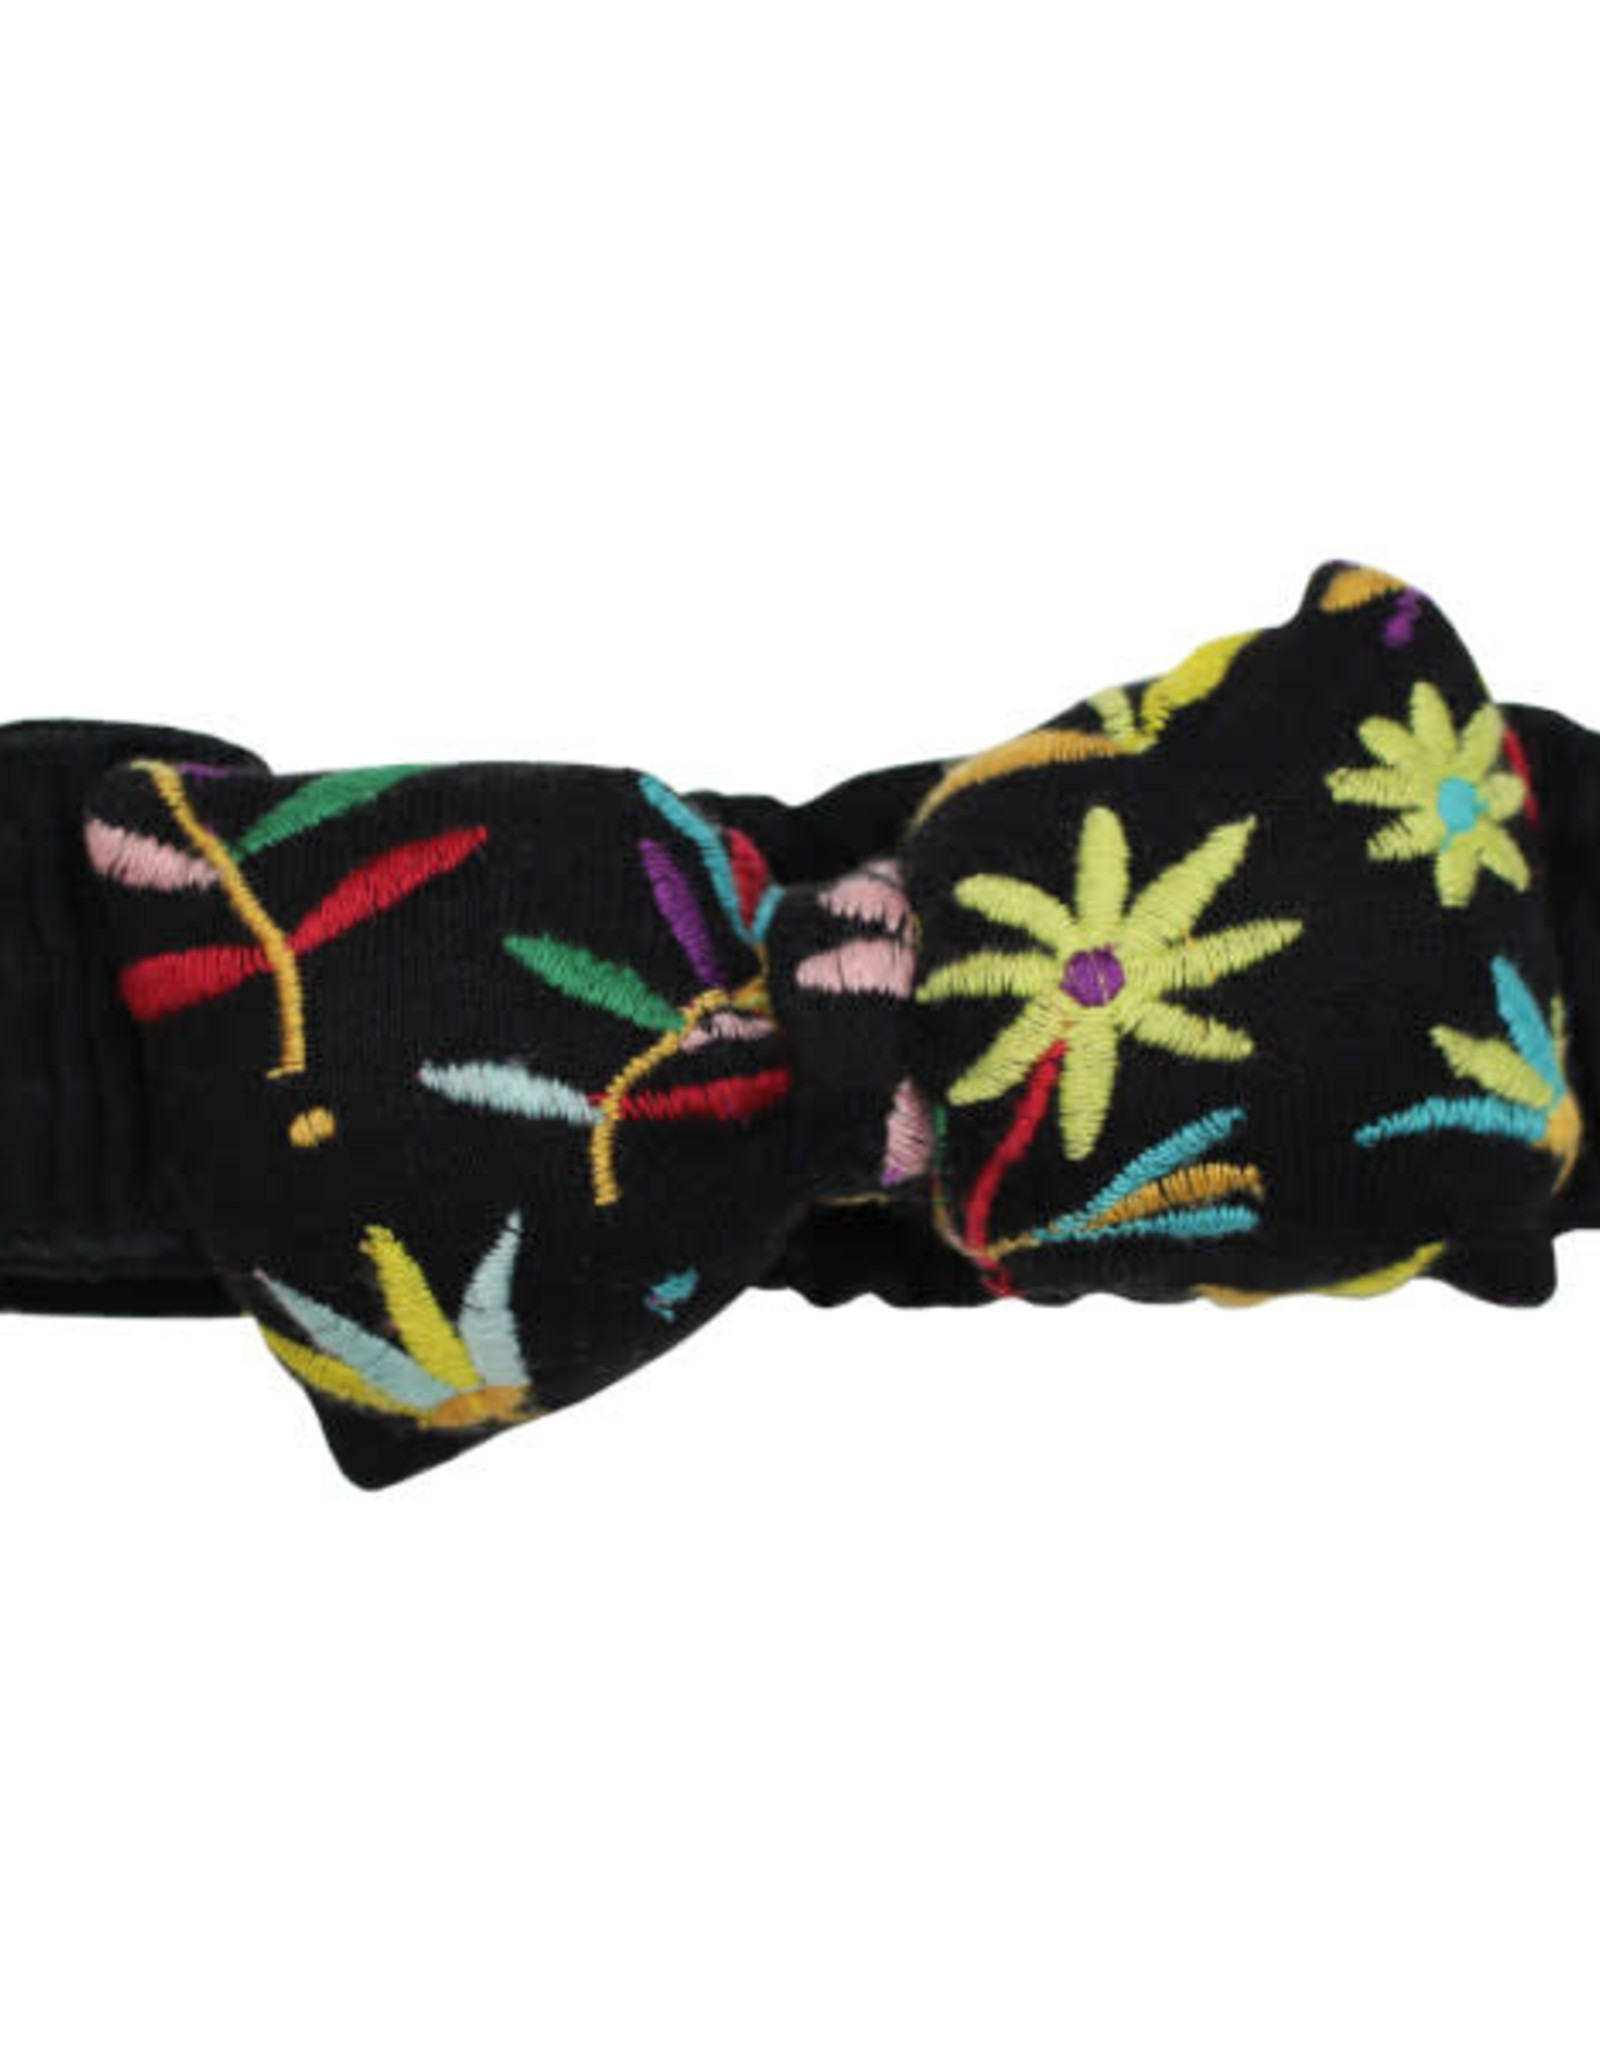 L'oved Baby Embroidered Bowtie Headband Black Floral